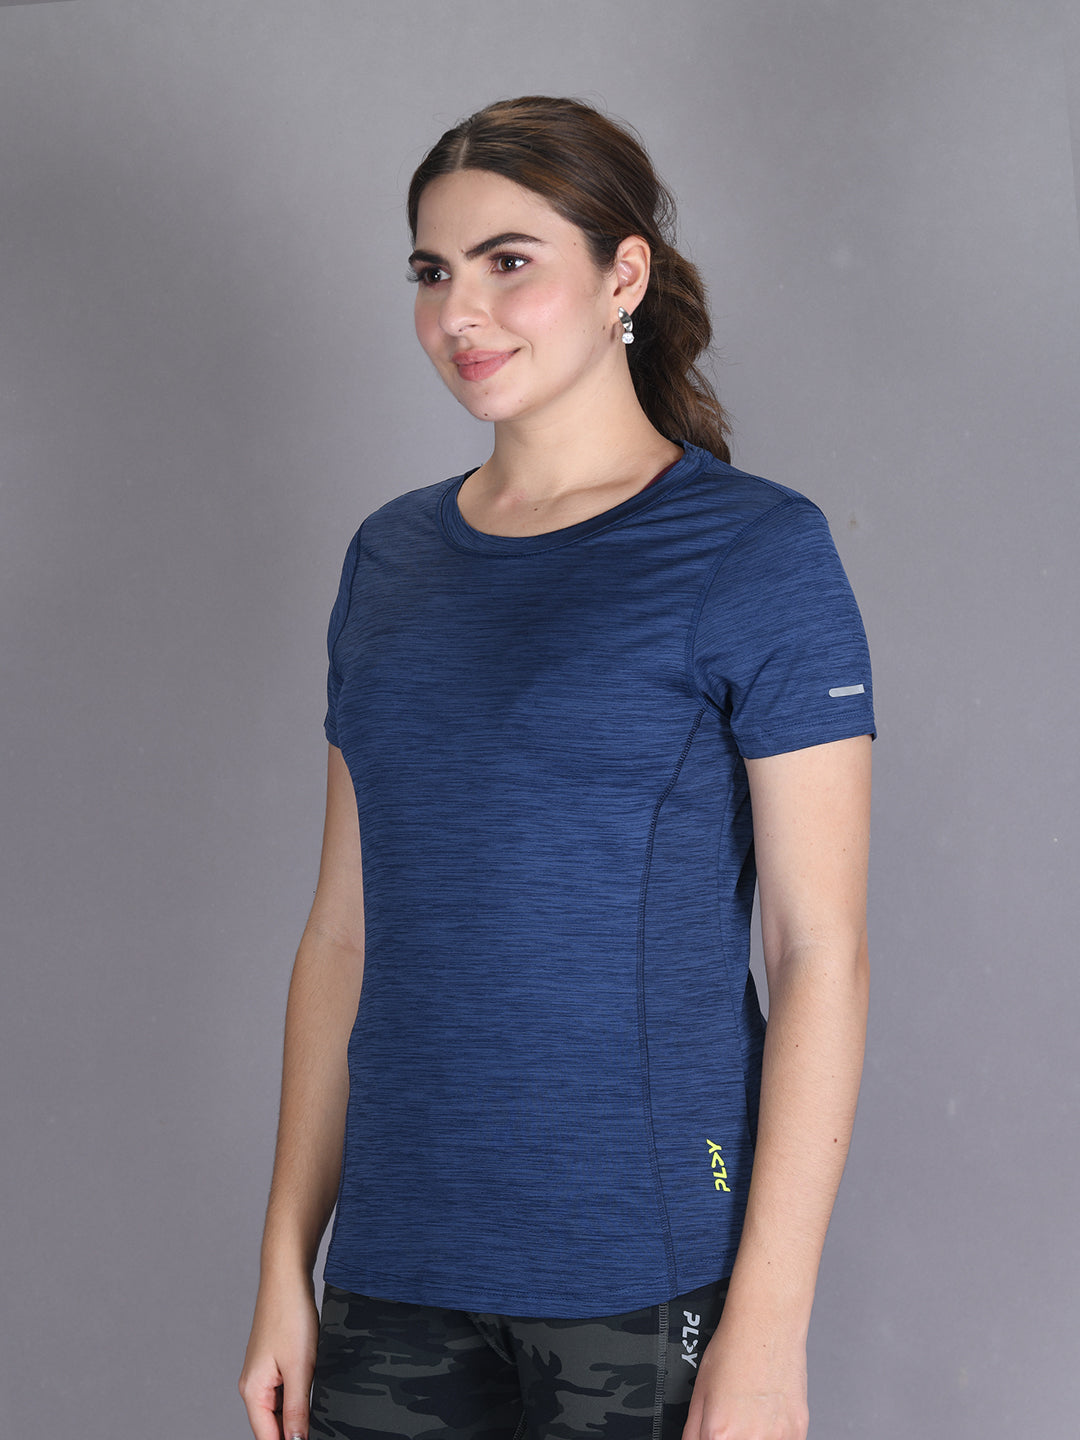 Blue Dri-Fit Play Series Active Wear Top #AT022